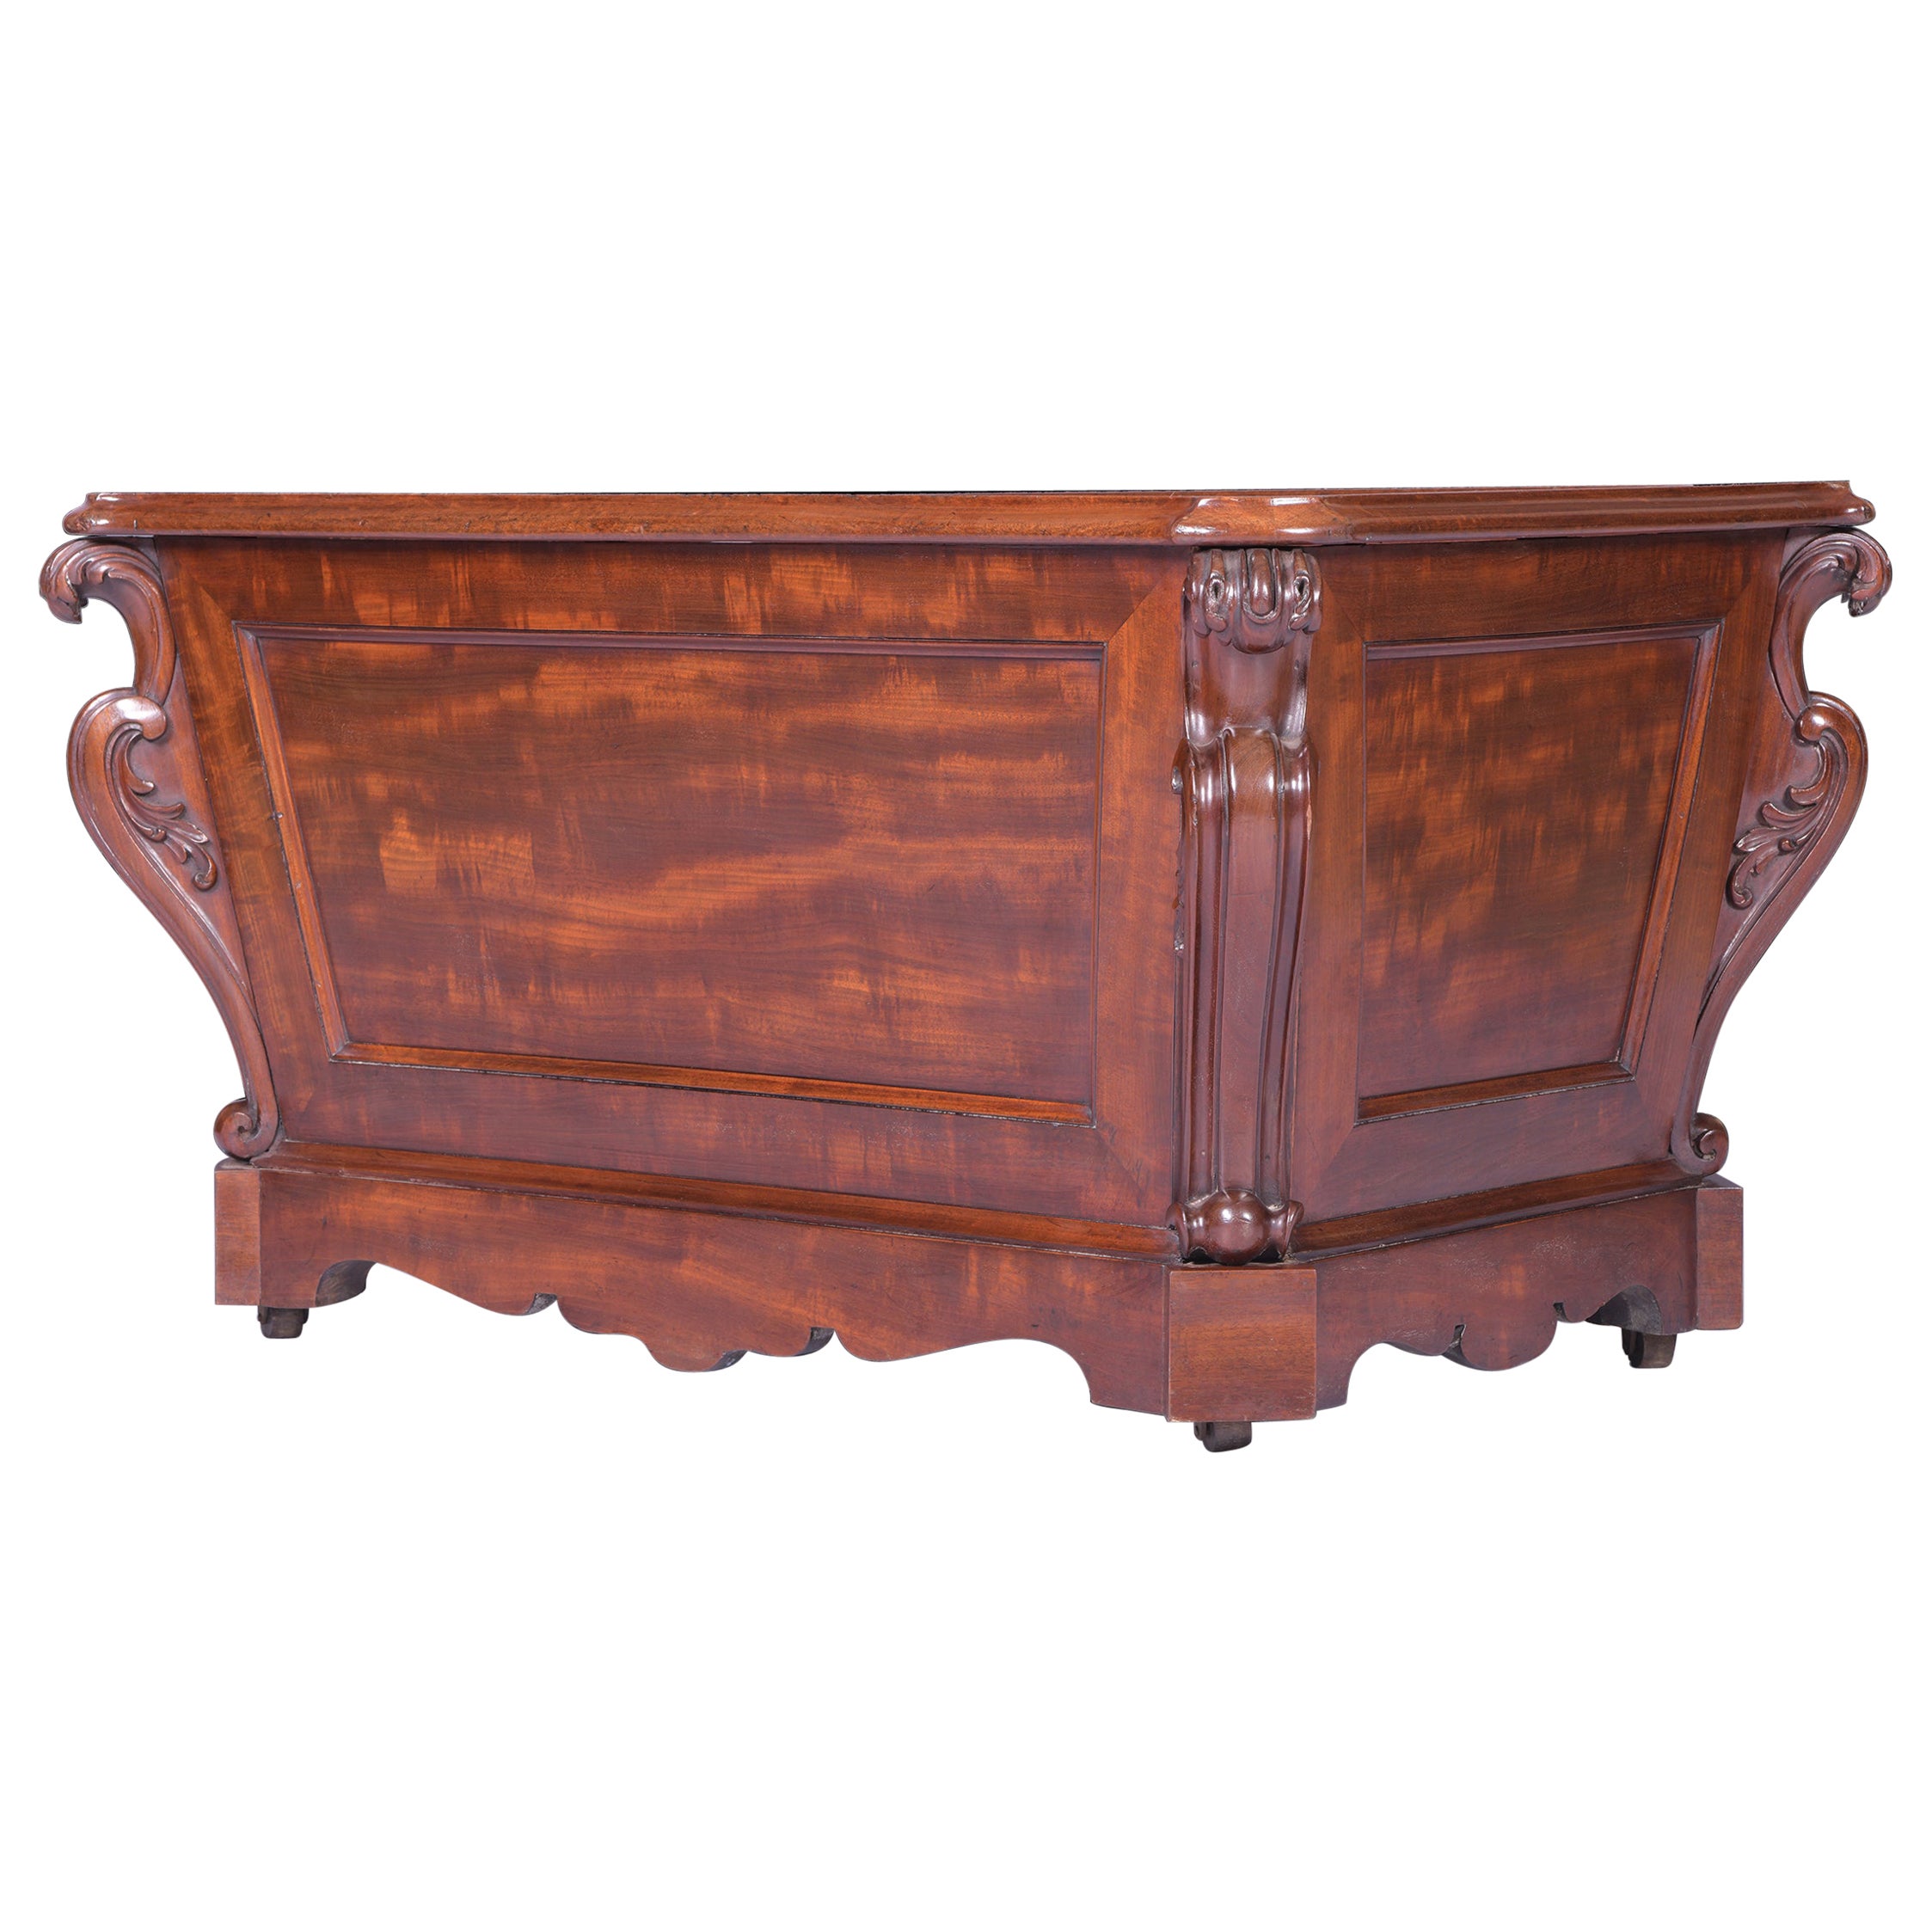 19th Century English Regency Mahogany Open Cellarette Attributed to Gillows For Sale